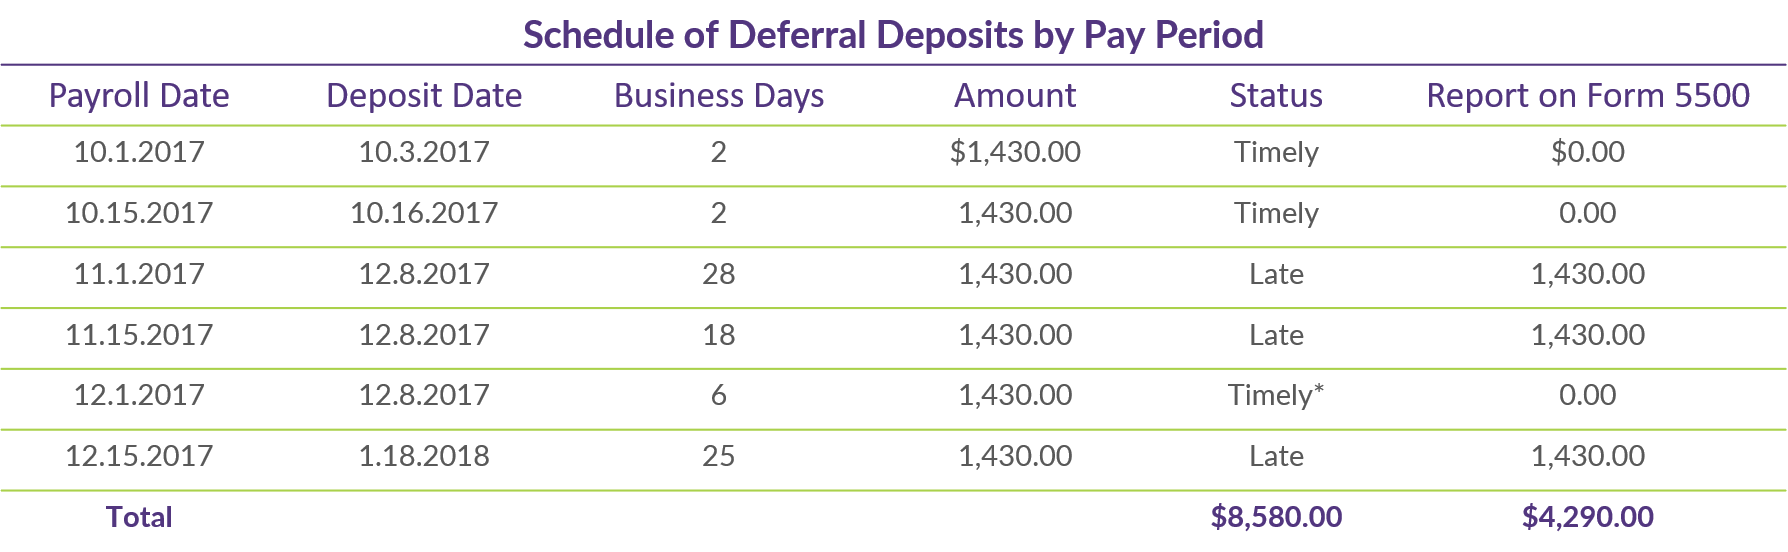 Q3 COTQ Table_Schedule of Deferral Deposits_1